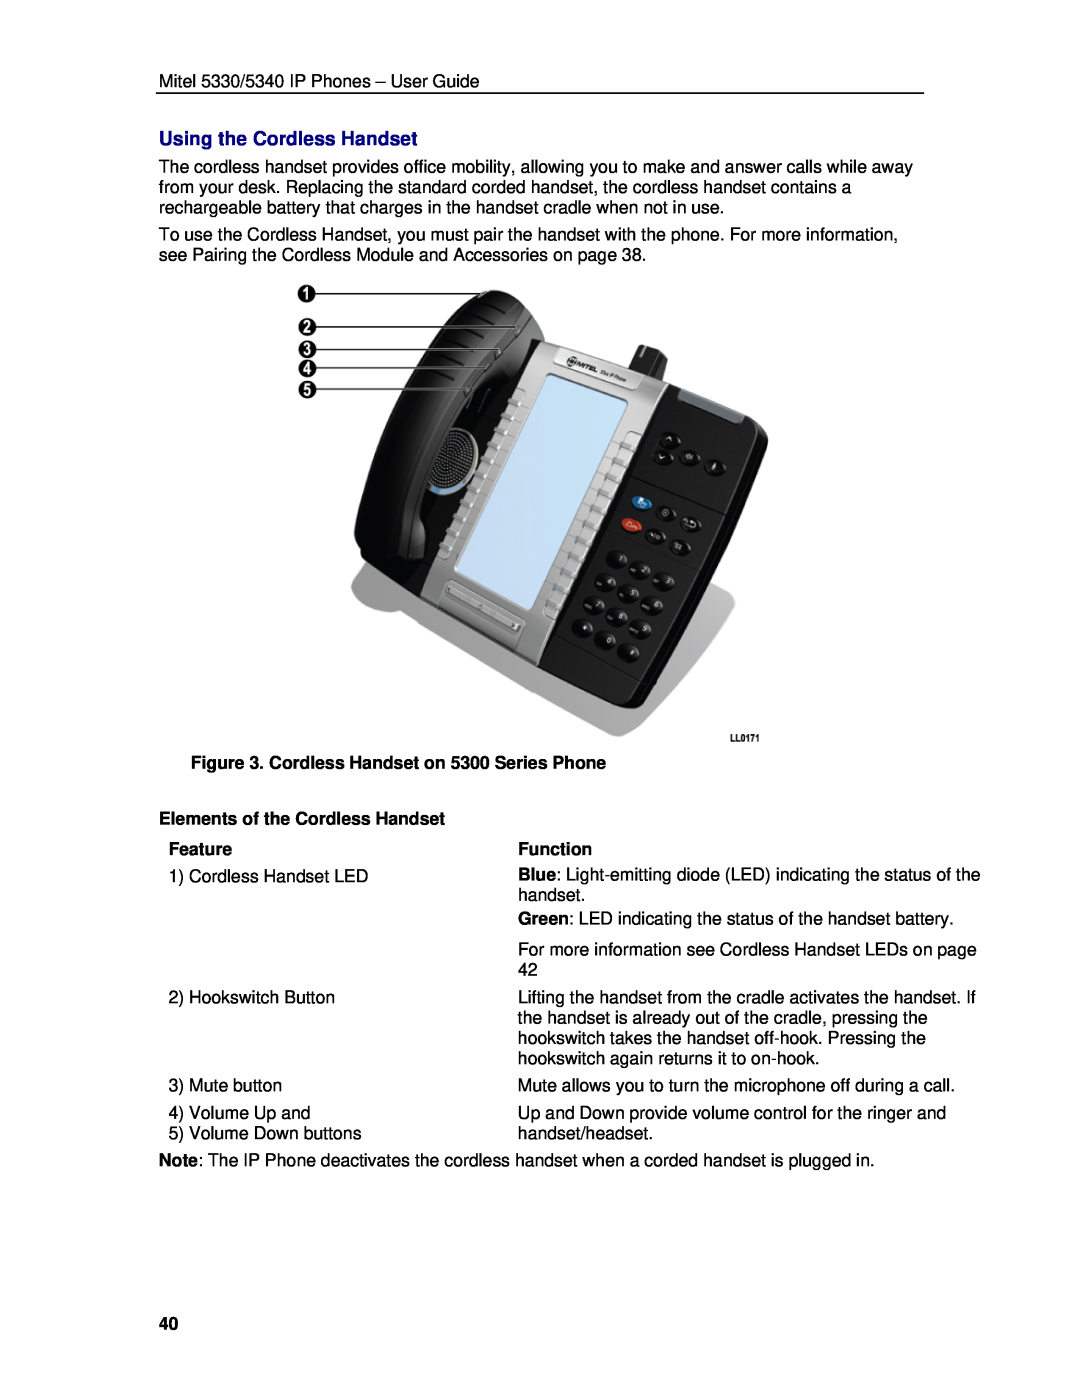 Mitel 5330 Using the Cordless Handset, Cordless Handset on 5300 Series Phone, Elements of the Cordless Handset, Feature 